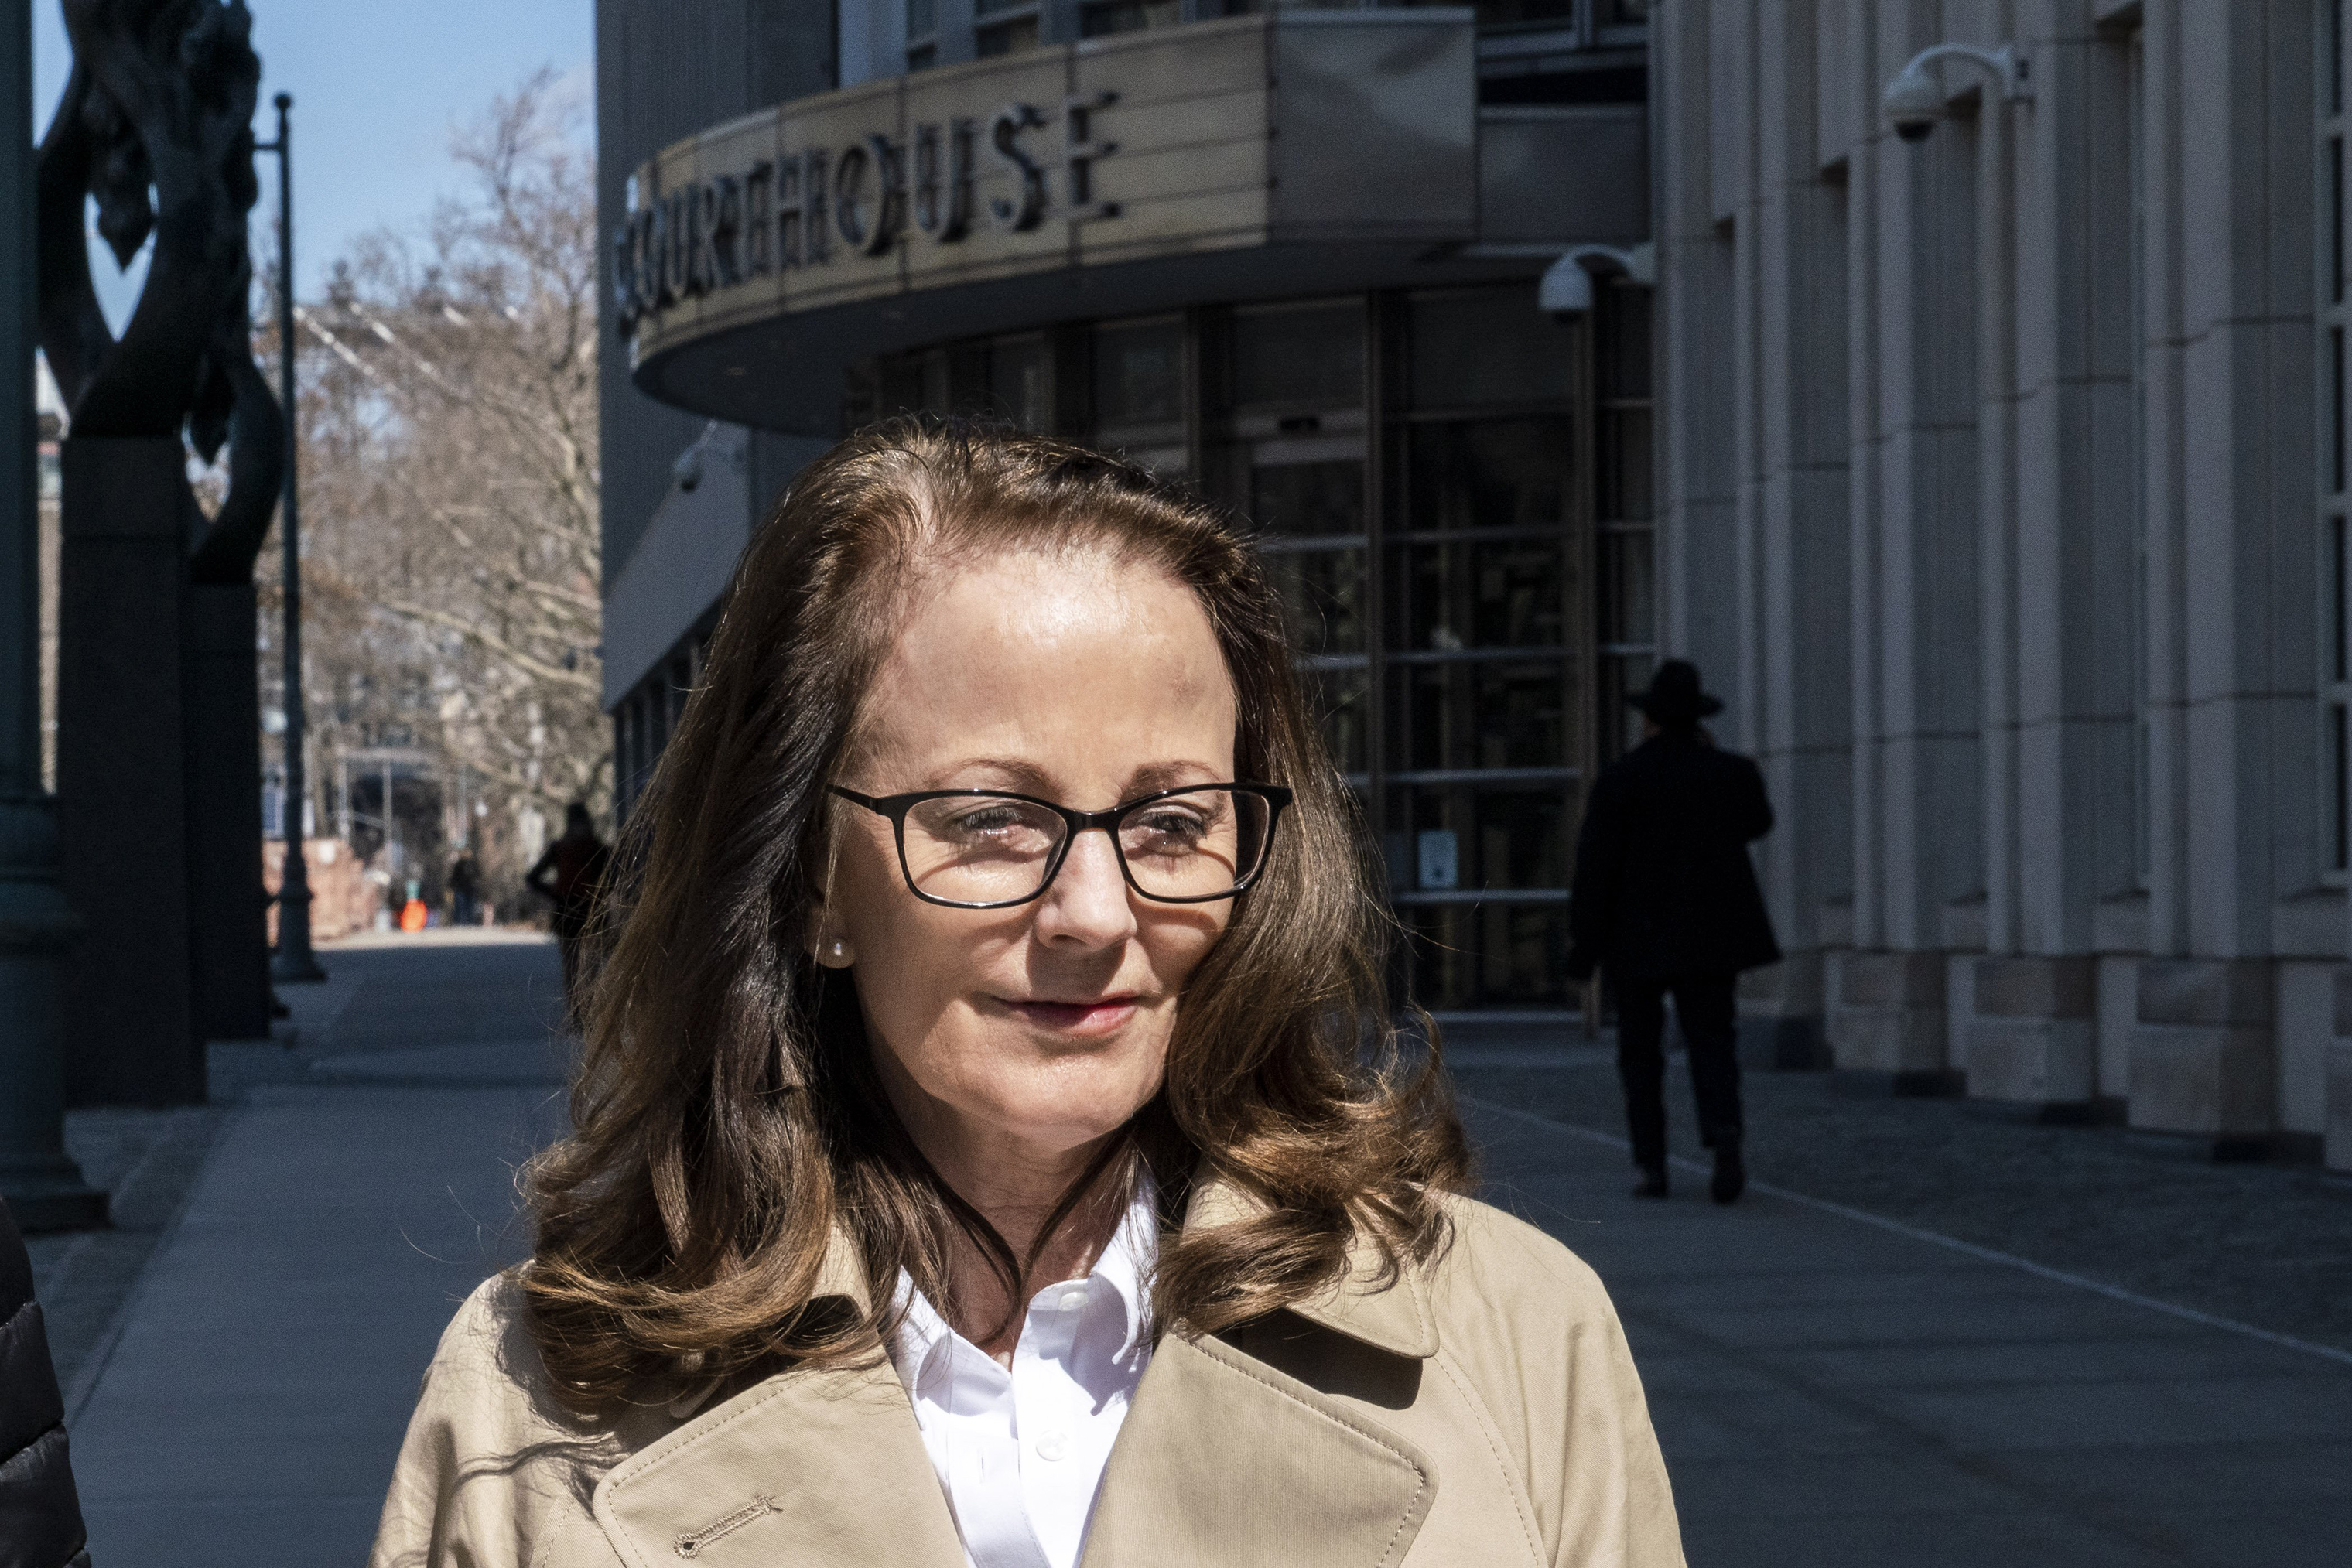 Kathy Russell leaves the Federal Courthouse in Brooklyn on March 18, 2019. (Natan Dvir—Polaris)